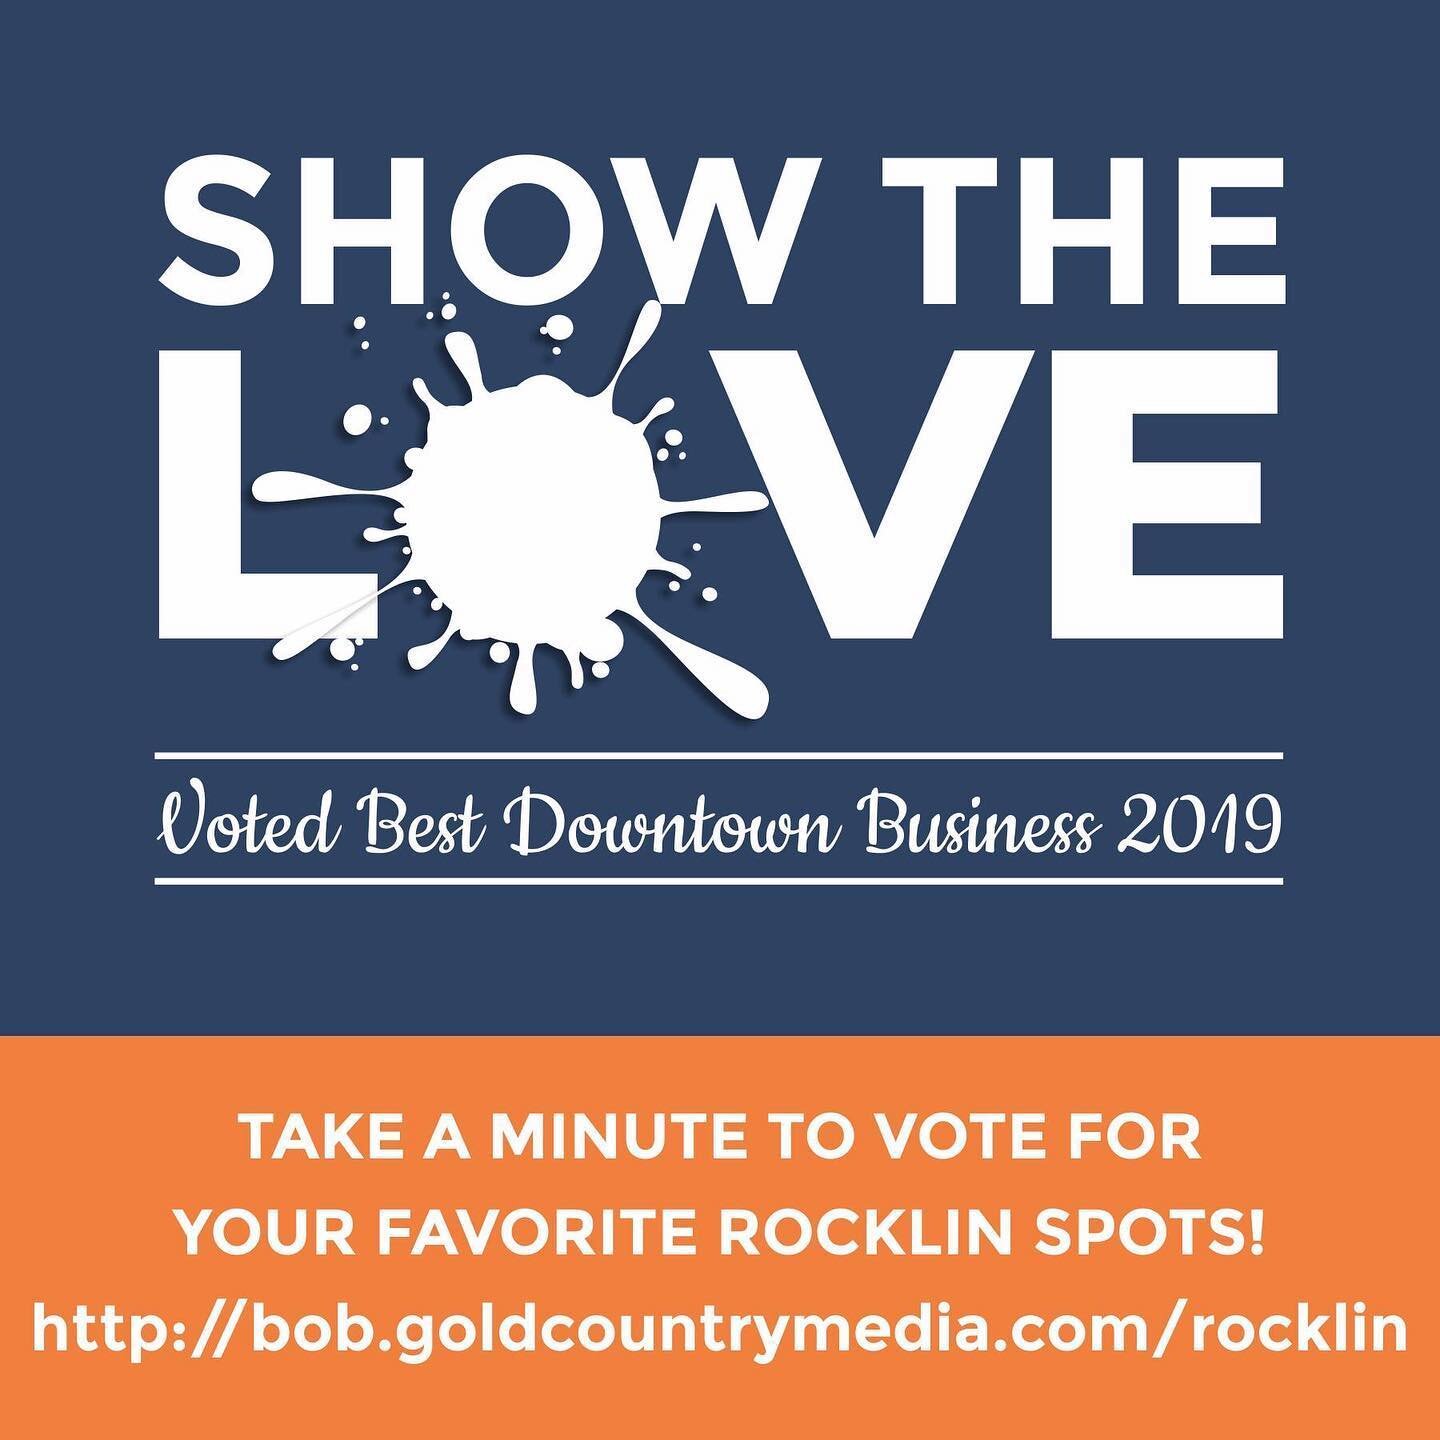 It's that time of the year again - BEST OF THE BEST!  Take some time to vote for your favorite Rocklin businesses! 
http://bob.goldcountrymedia.com/rocklin
You can't buy happiness but you can SHOP &amp; SUPPORT LOCAL, and that's kind of the same thin